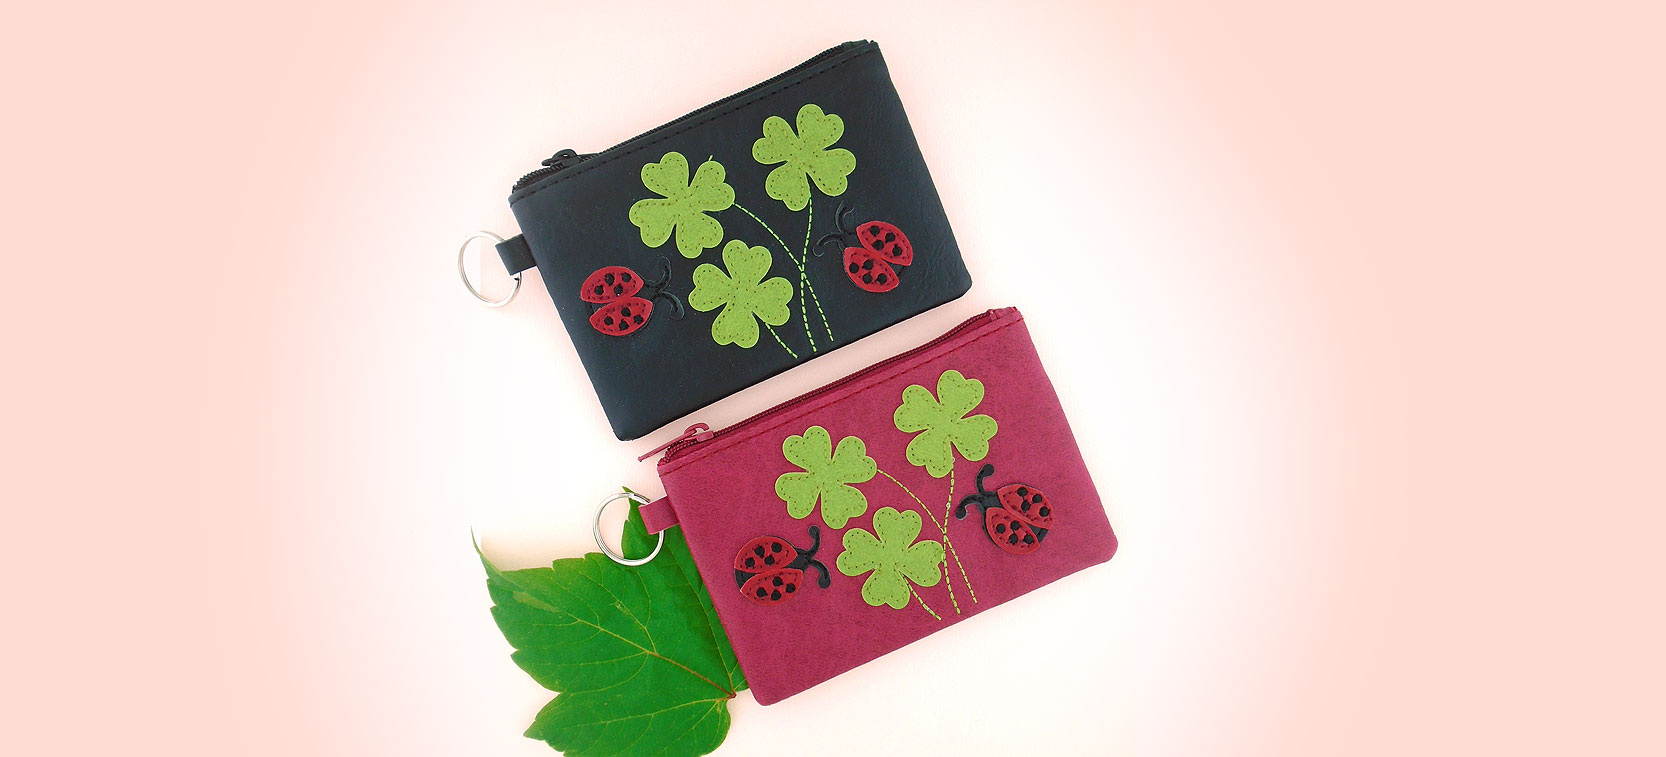 LAVISHY design and wholesale good luck/lucky clover themed vegan accessories and gfits to gift shops, boutiques and book stores in Canada, USA and worldwide.